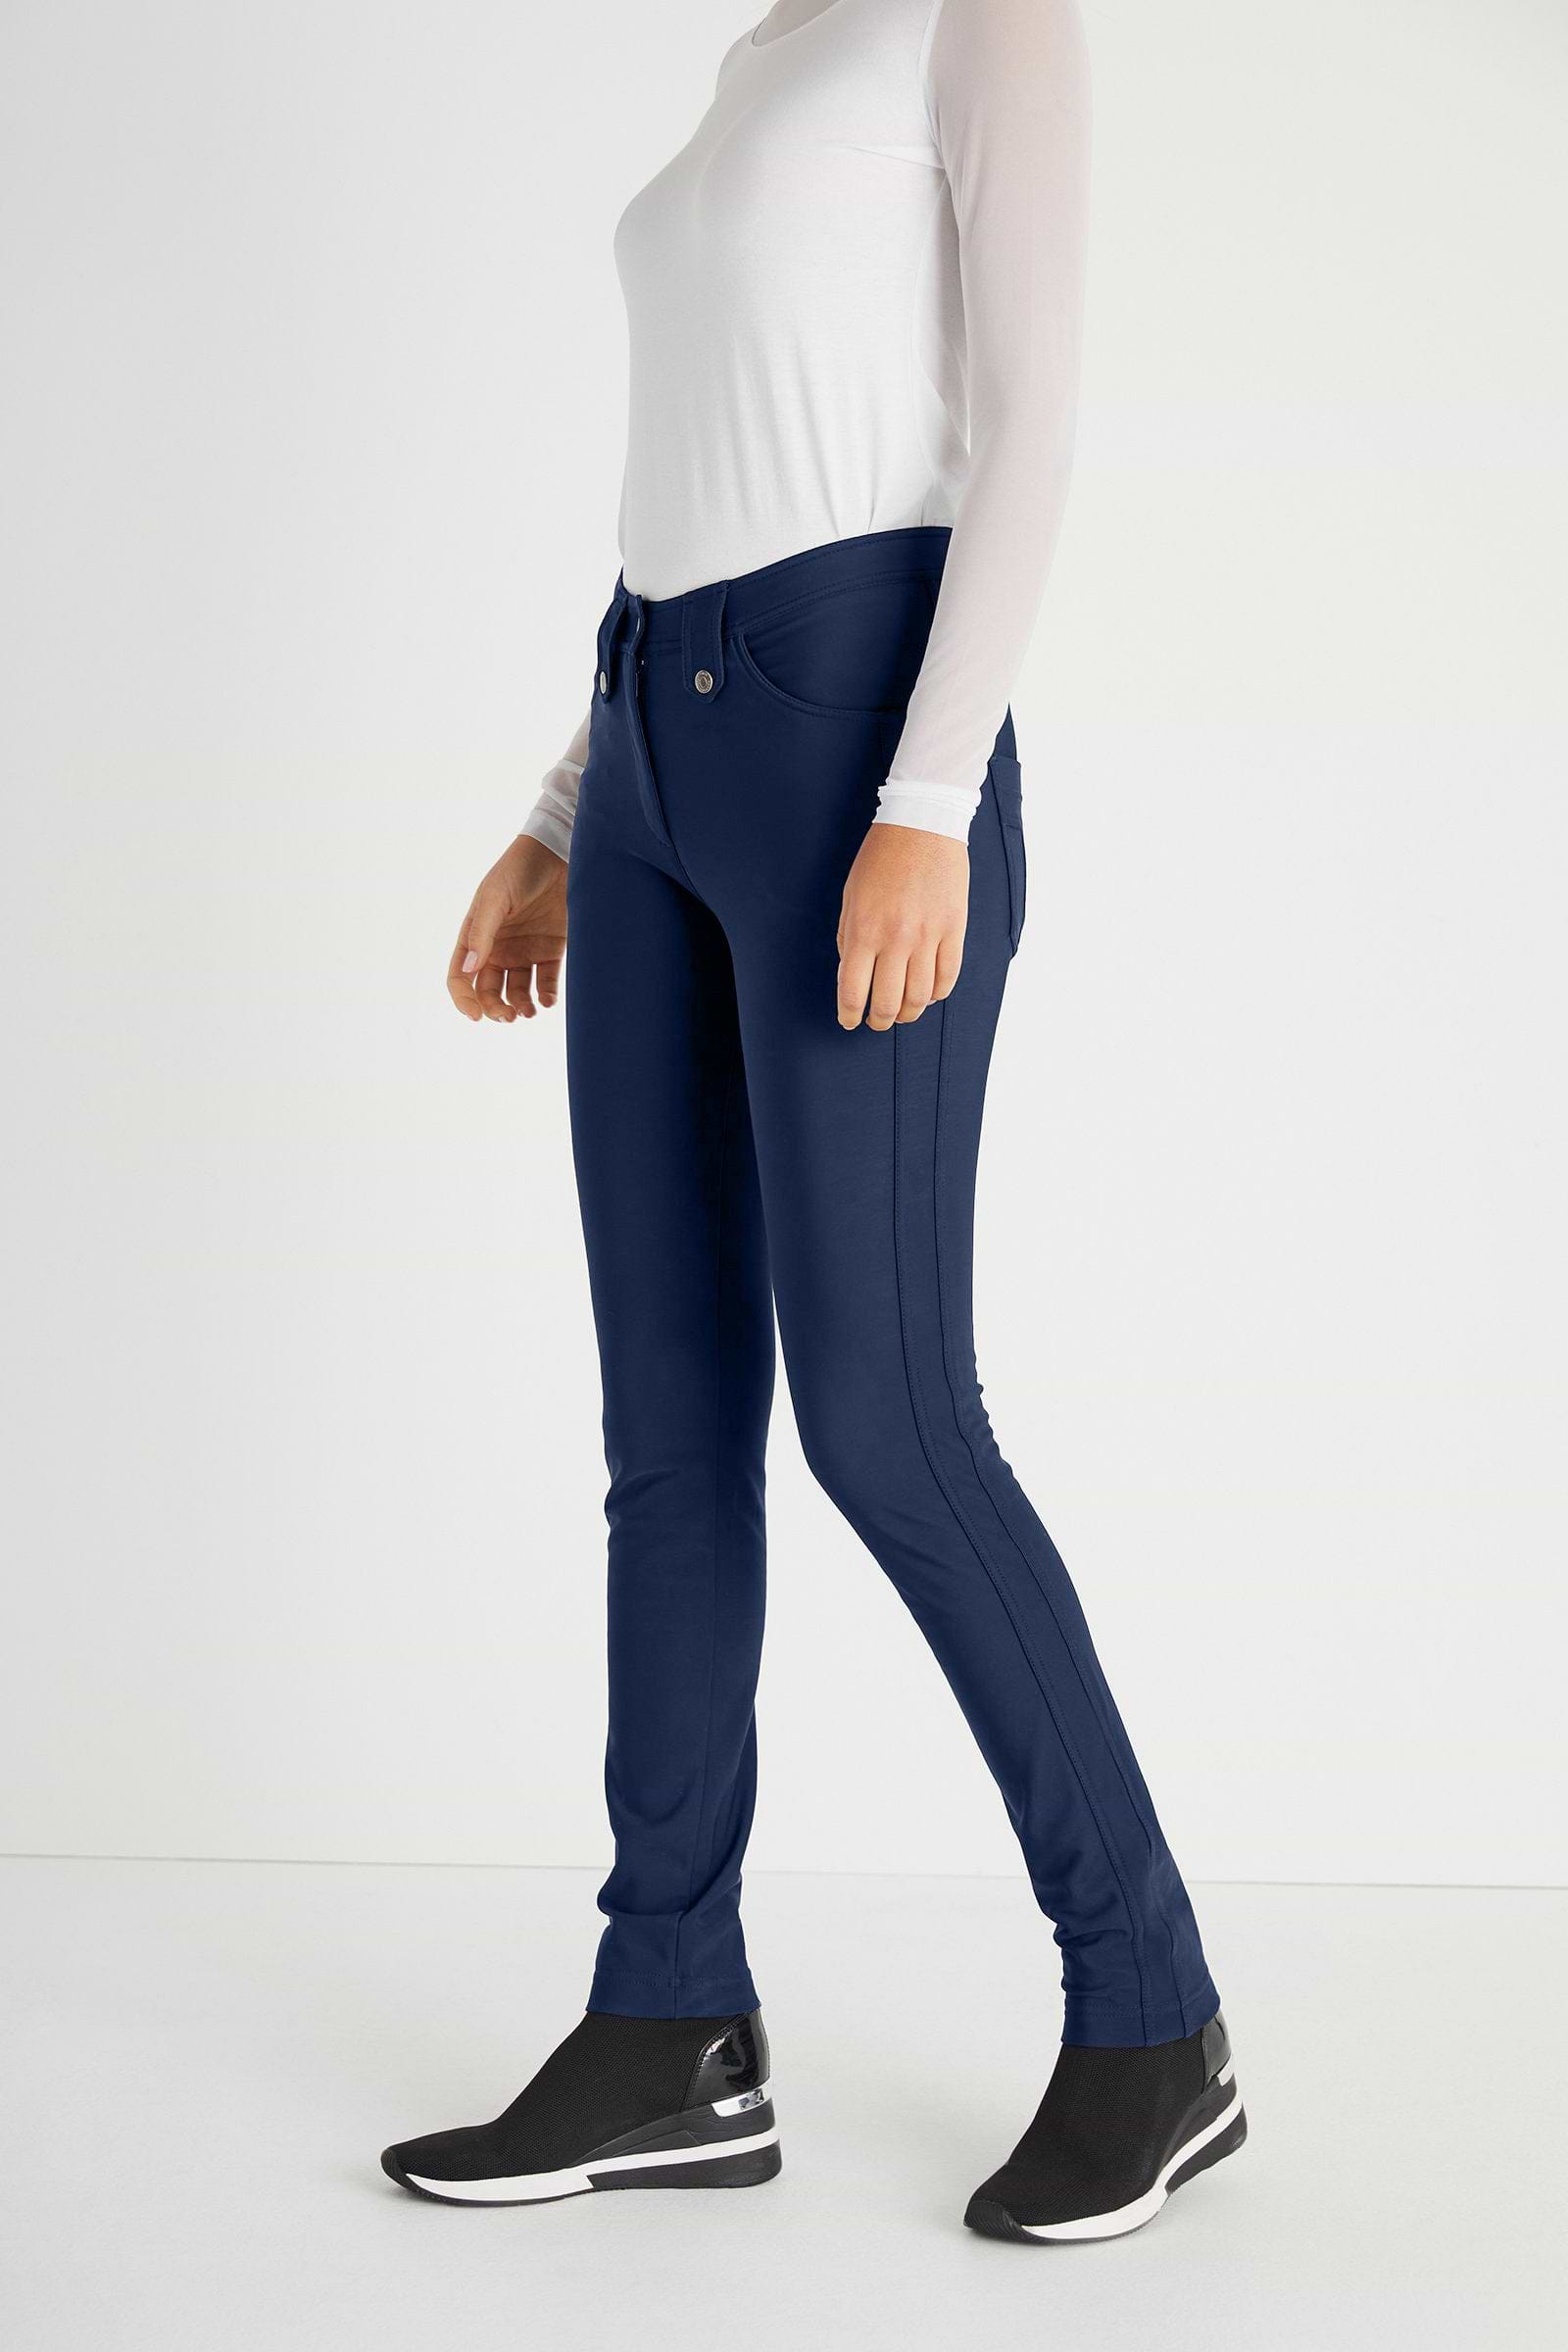 The Best Travel Pants. Side Profile of the Skyler Cozy Fleece-Lined Travel Pant in Navy